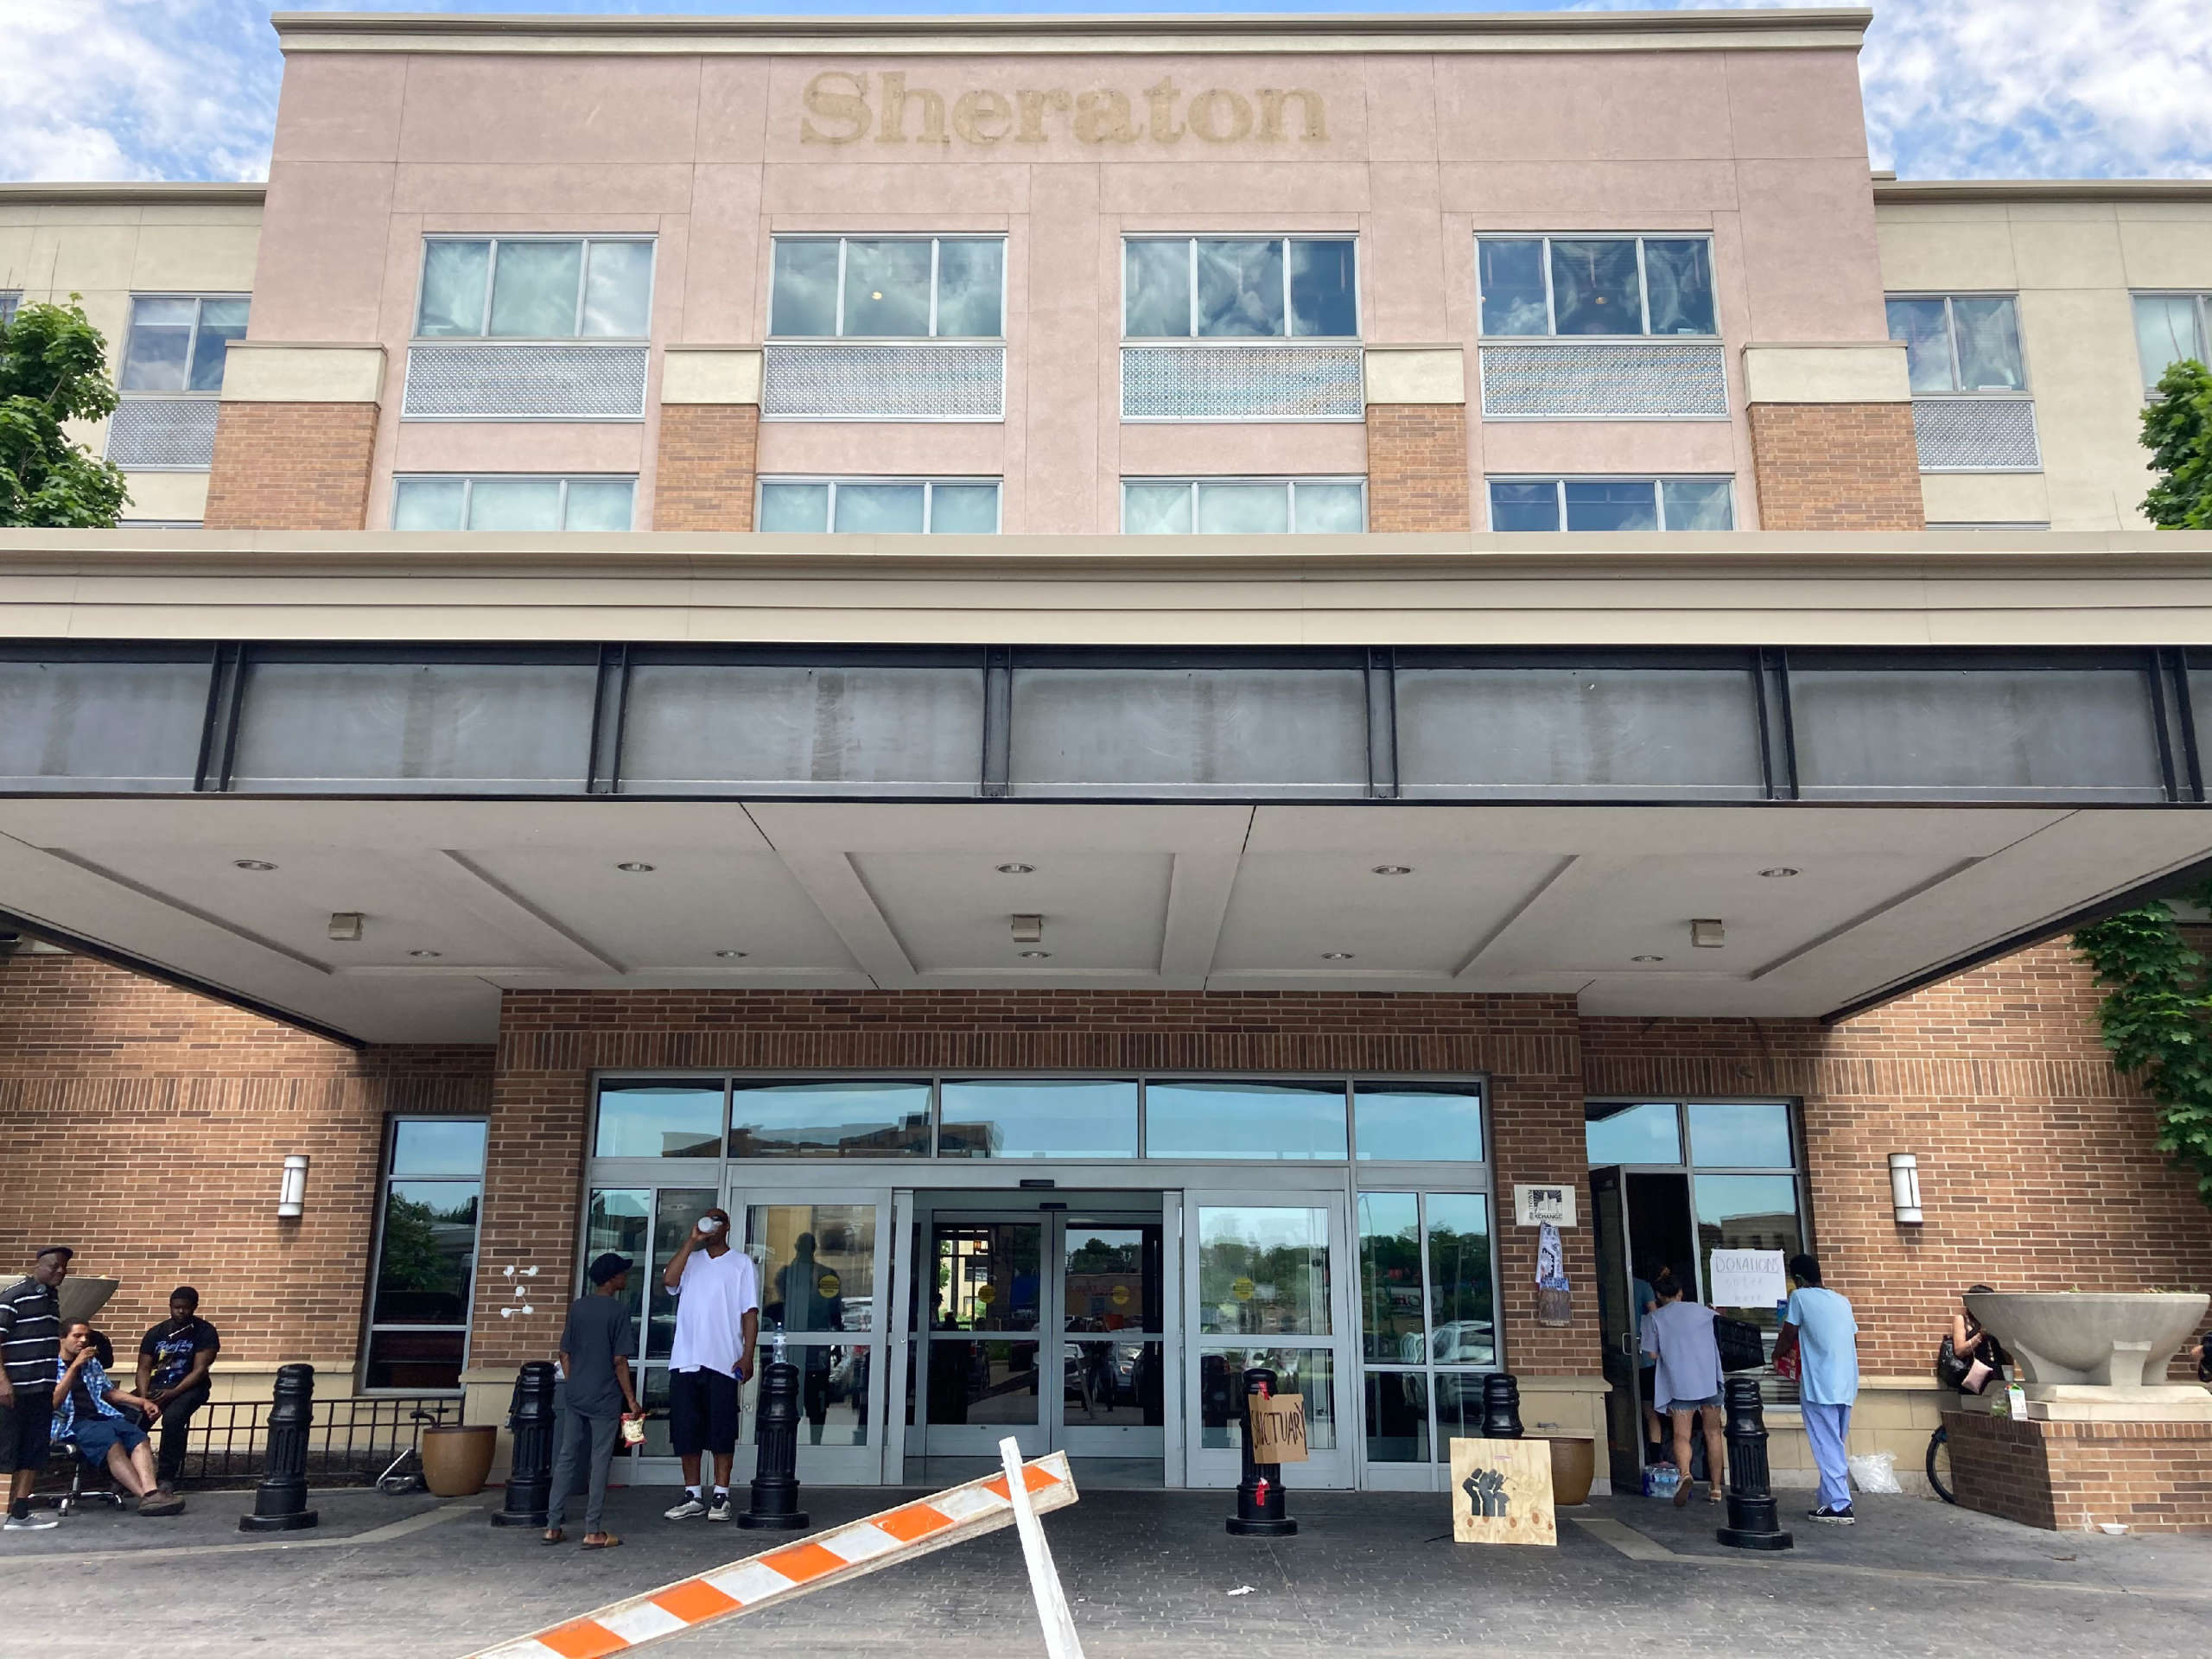 The Sheraton Midtown Hotel off the Lake Street corridor in south Minneapolis is now occupied by houseless residents and activists, who converted the building into a shelter for those displaced by conflict between protesters and the police.